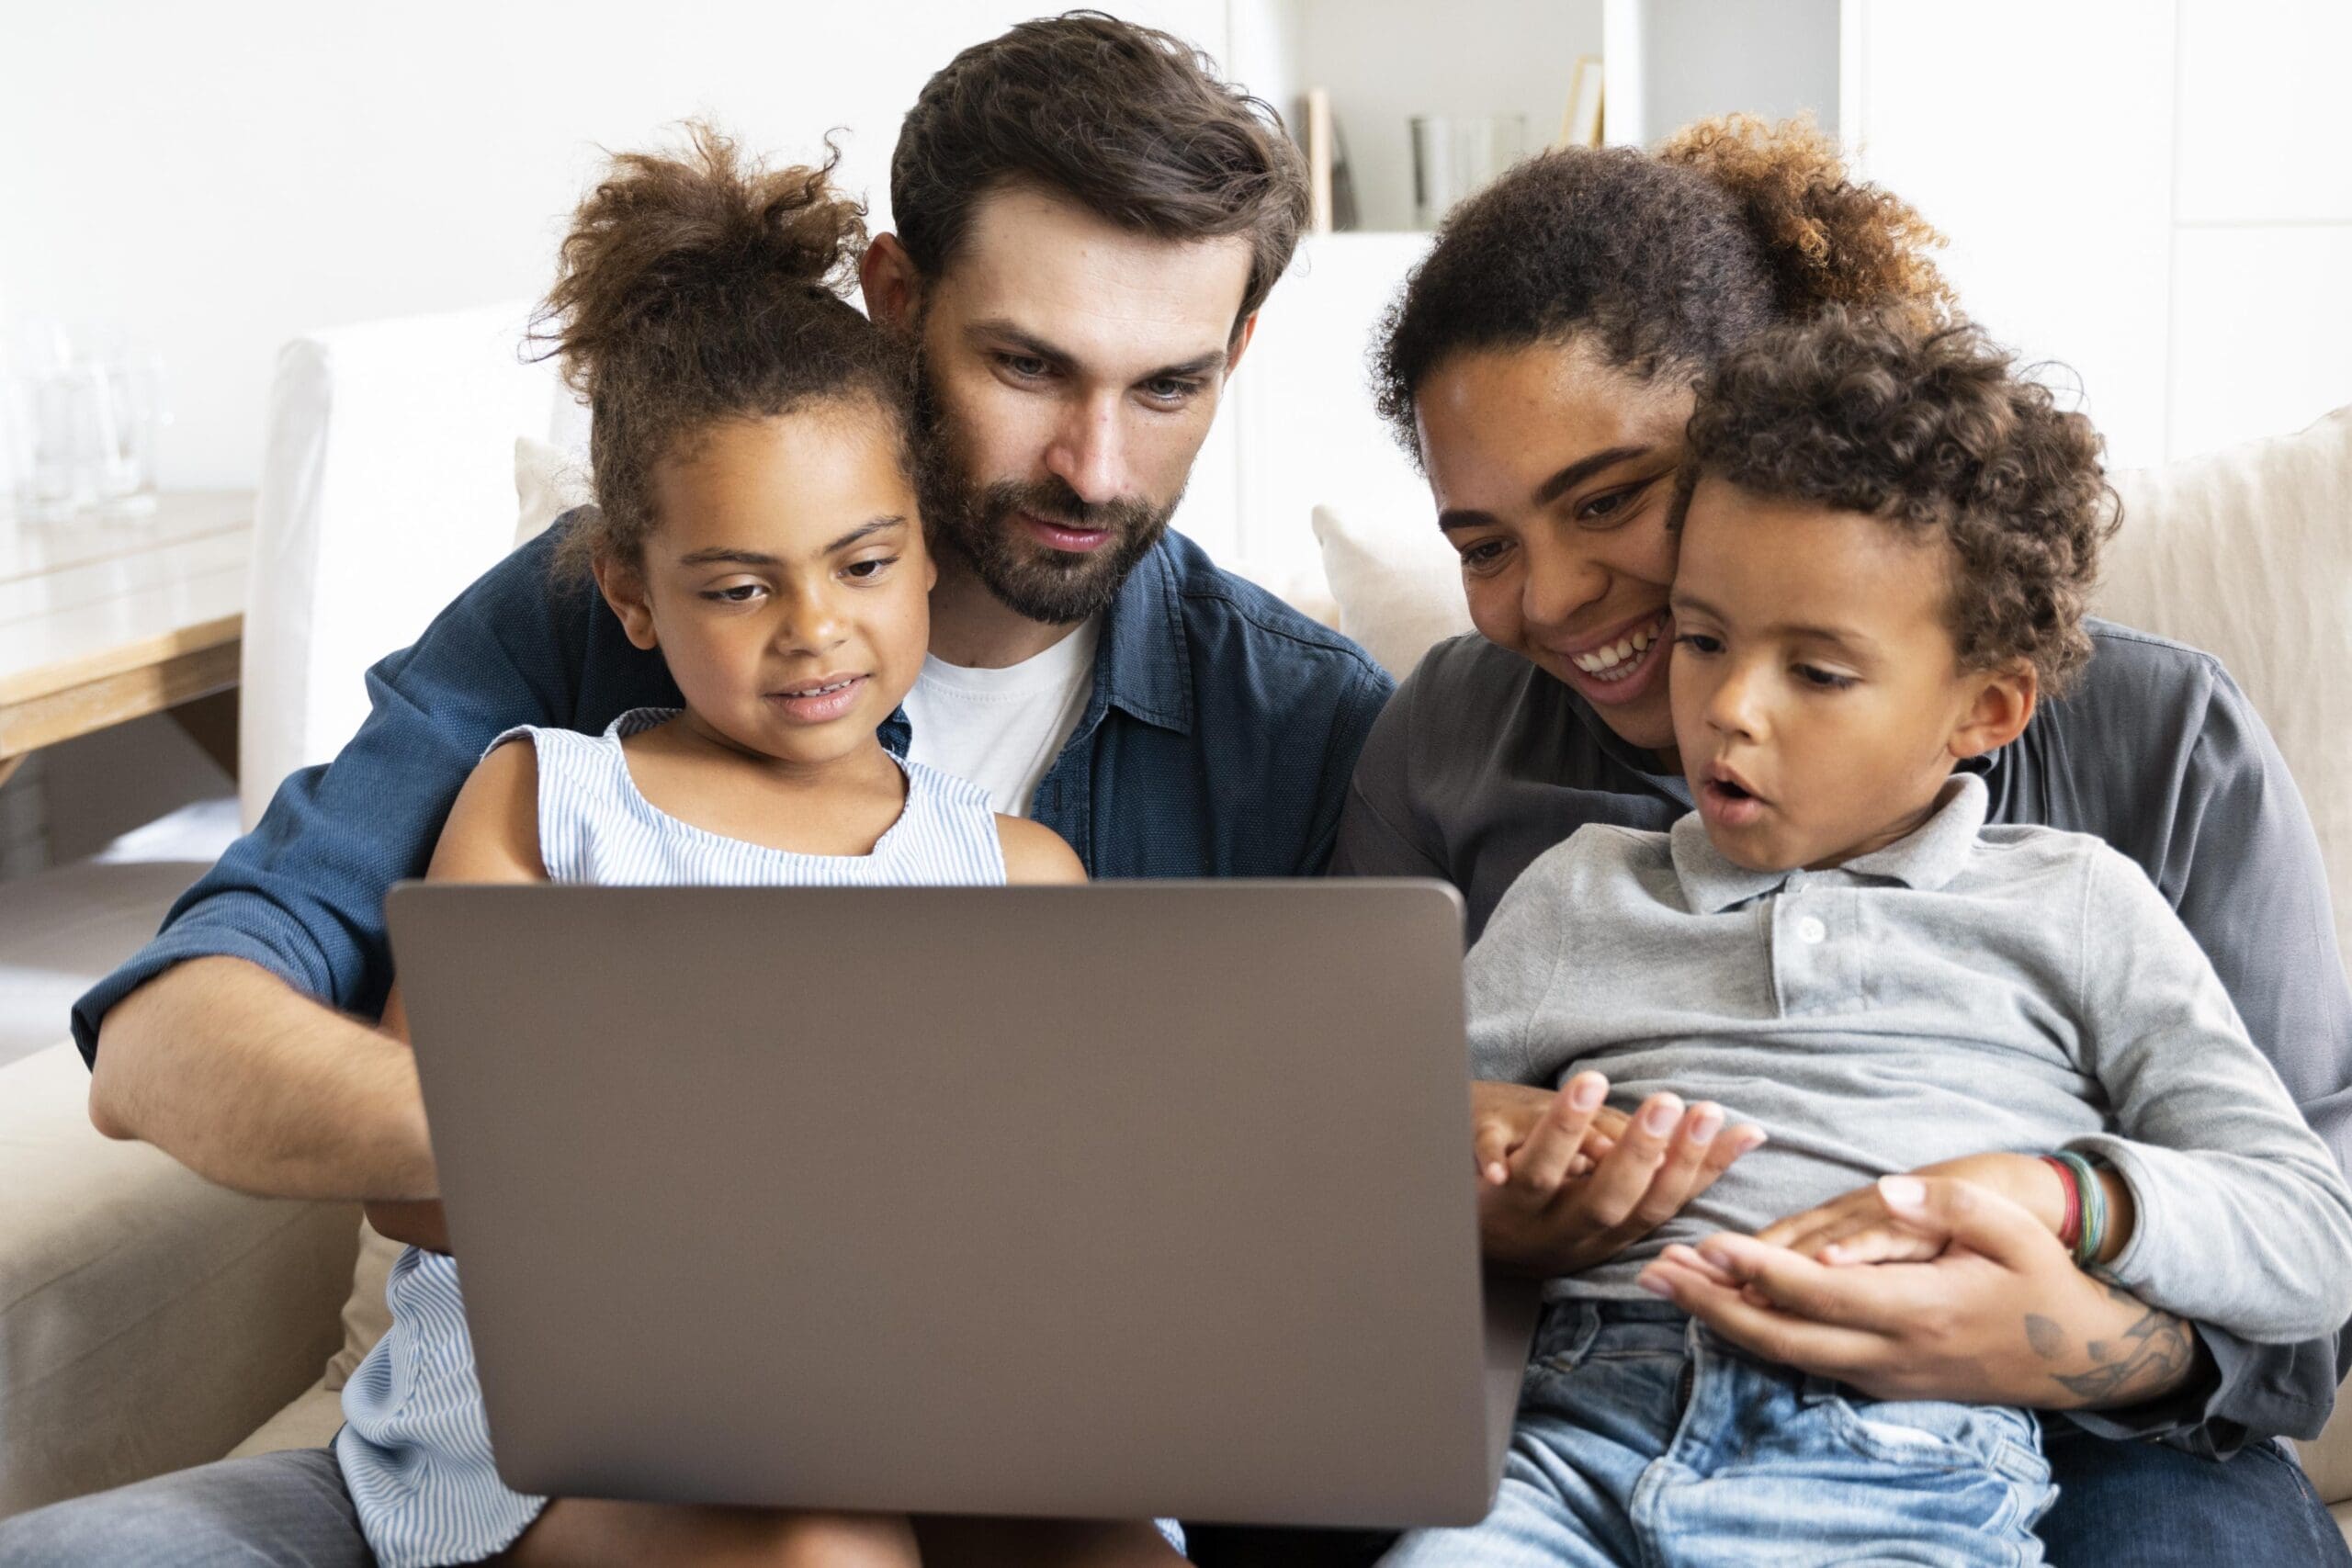 Family of four. Mom, dad and two kids looking at laptop